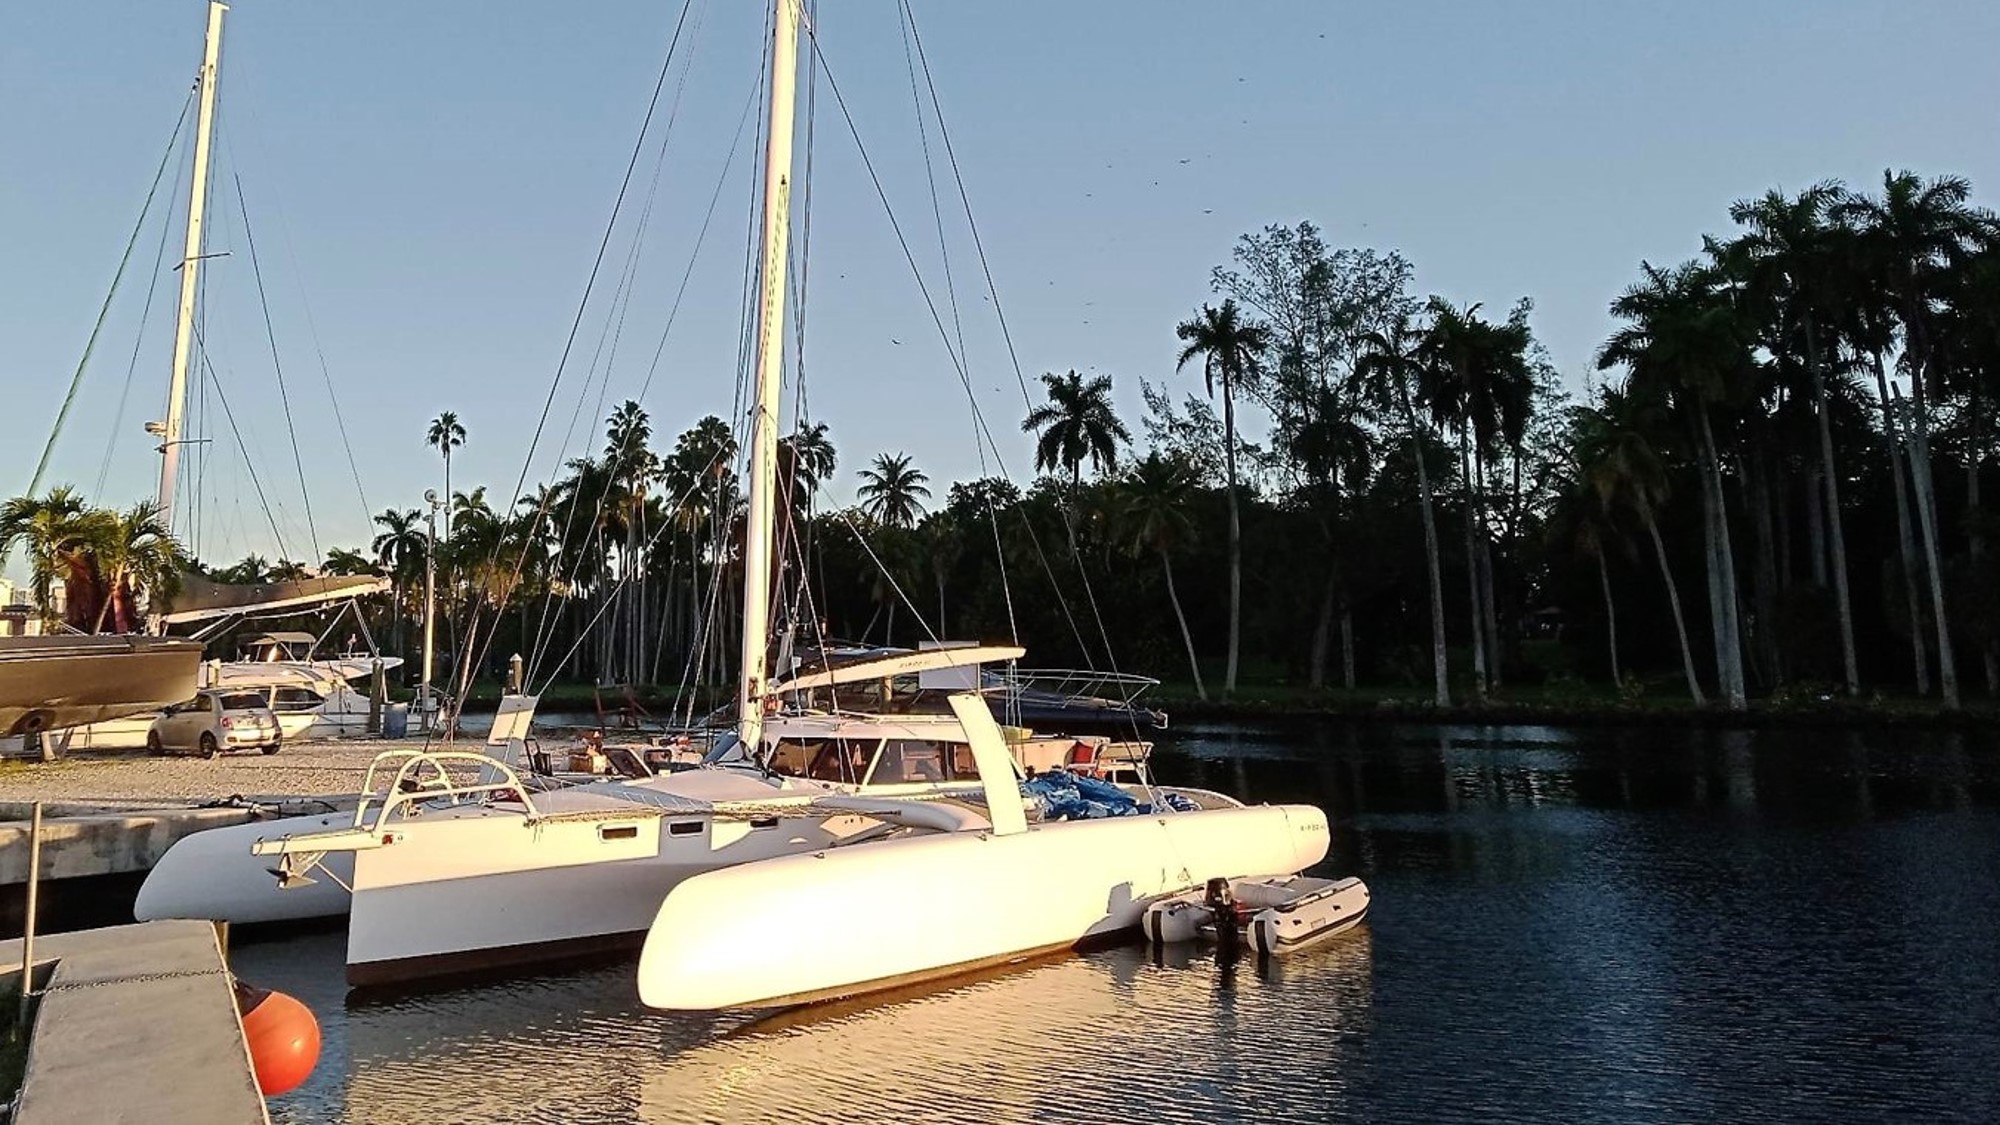 Rapido’s first trimaran to USA has arrived! Miami Boat Show 2023